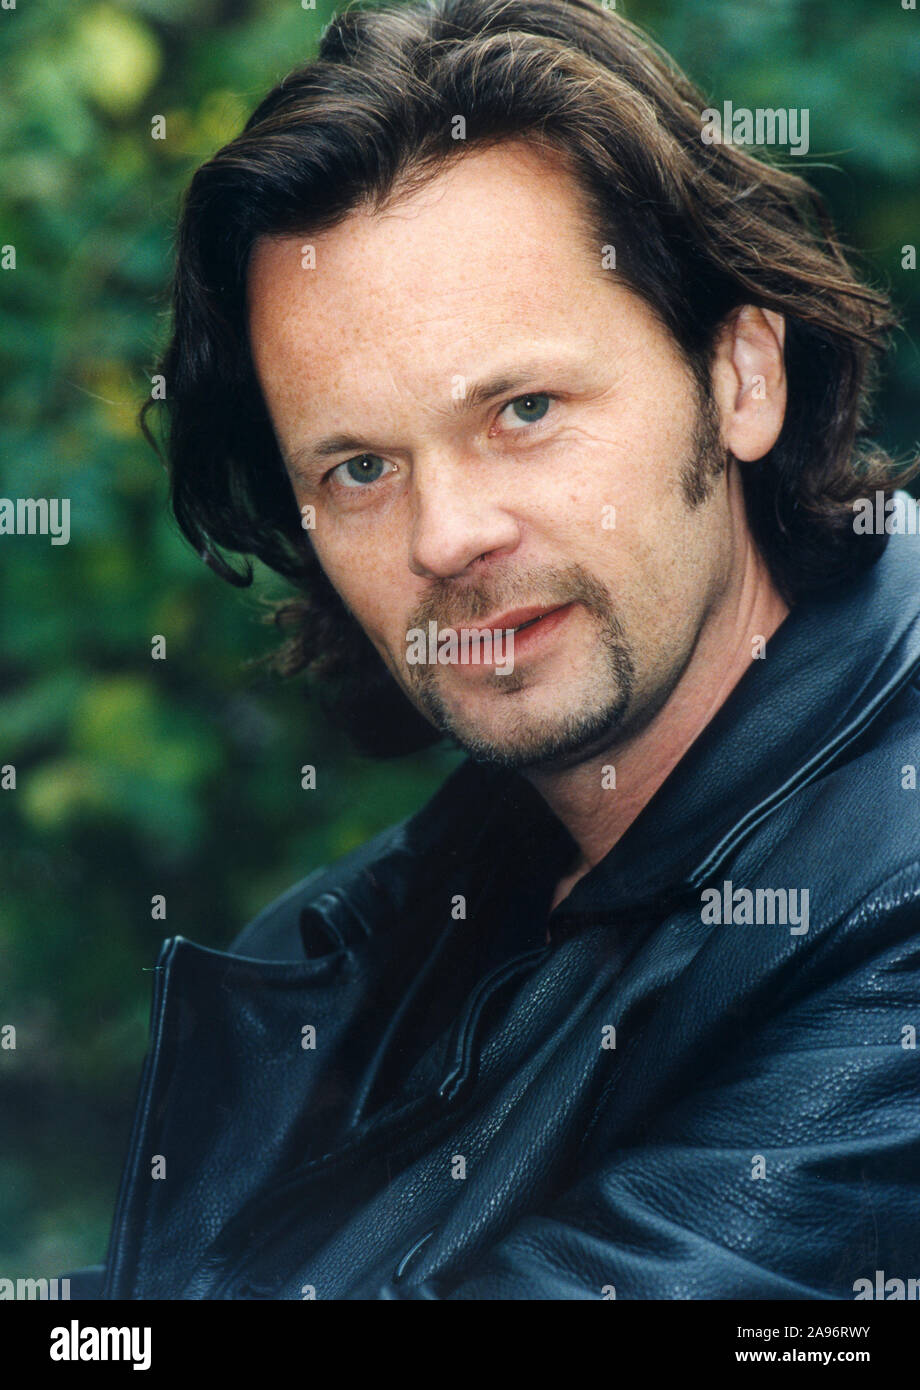 Anders Glenmark artist and music producer Stock Photo